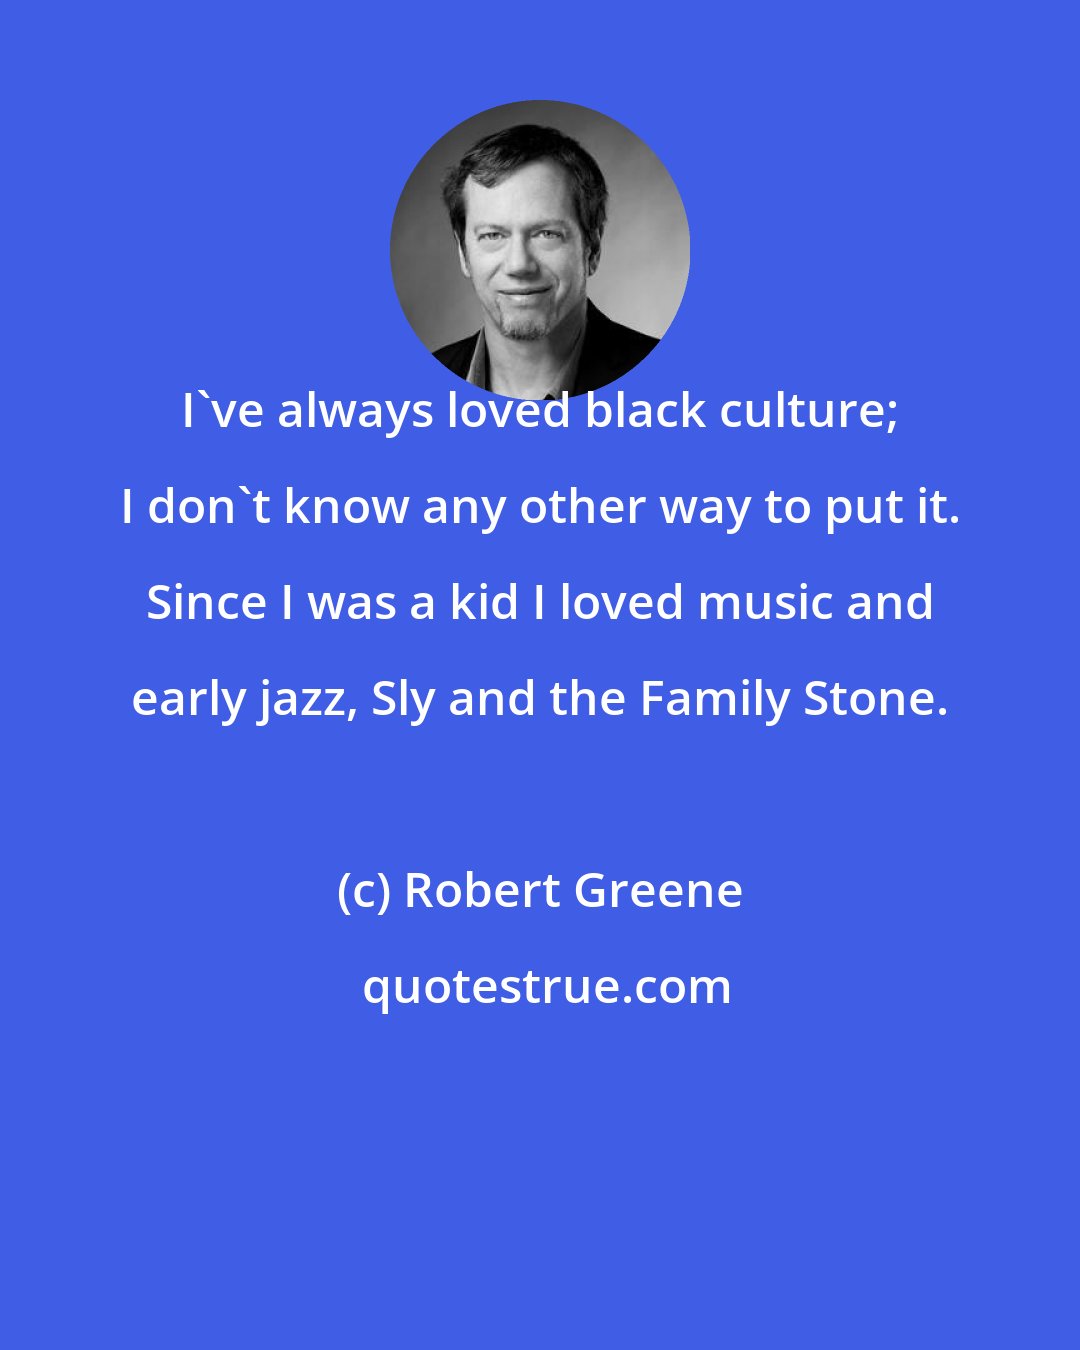 Robert Greene: I've always loved black culture; I don't know any other way to put it. Since I was a kid I loved music and early jazz, Sly and the Family Stone.